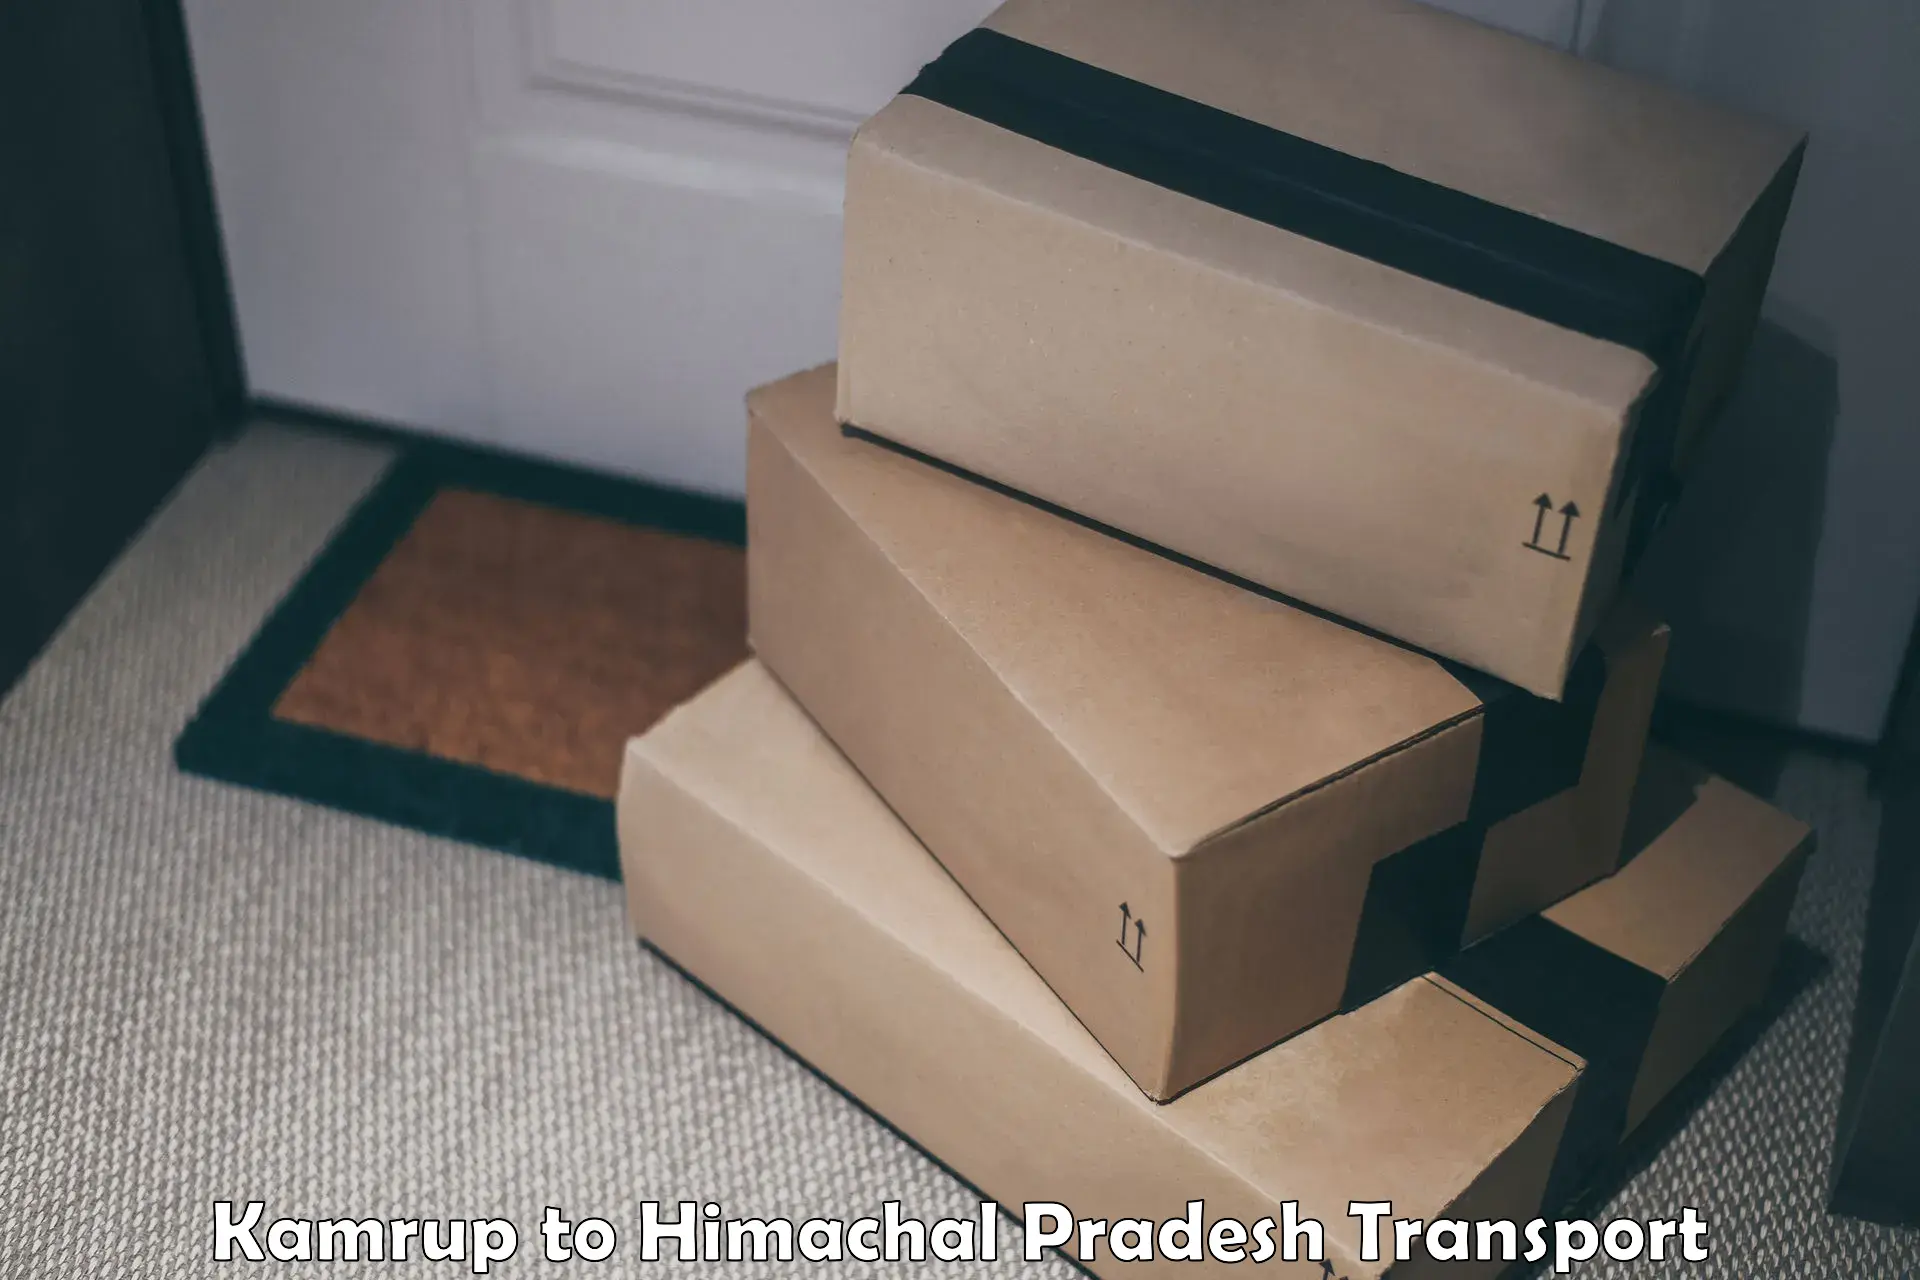 Parcel transport services Kamrup to Palampur